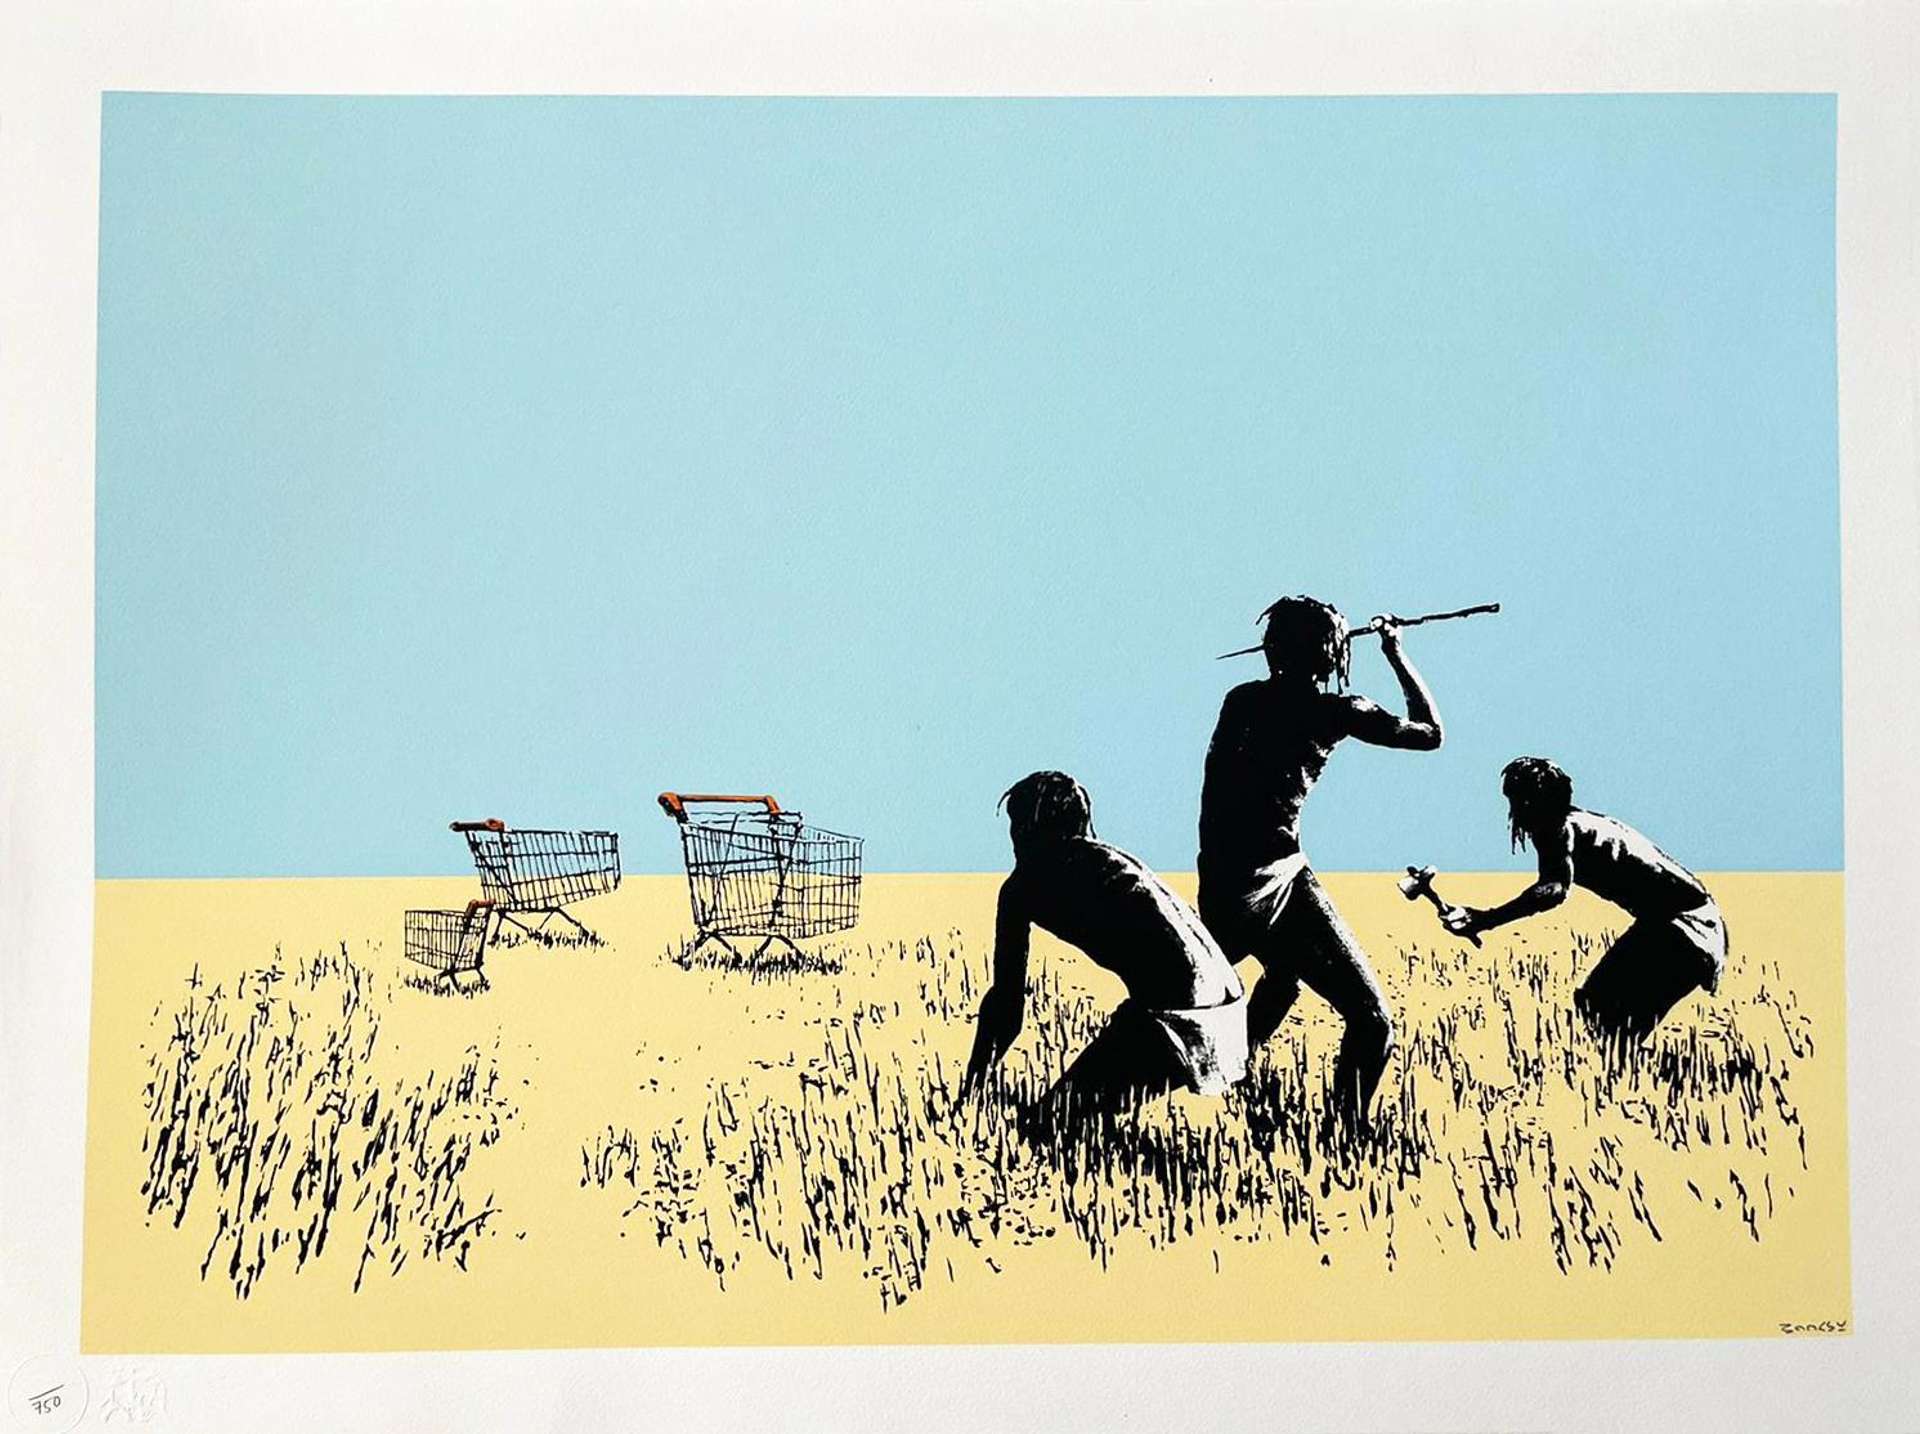 10 Facts About Banksy's Trolleys